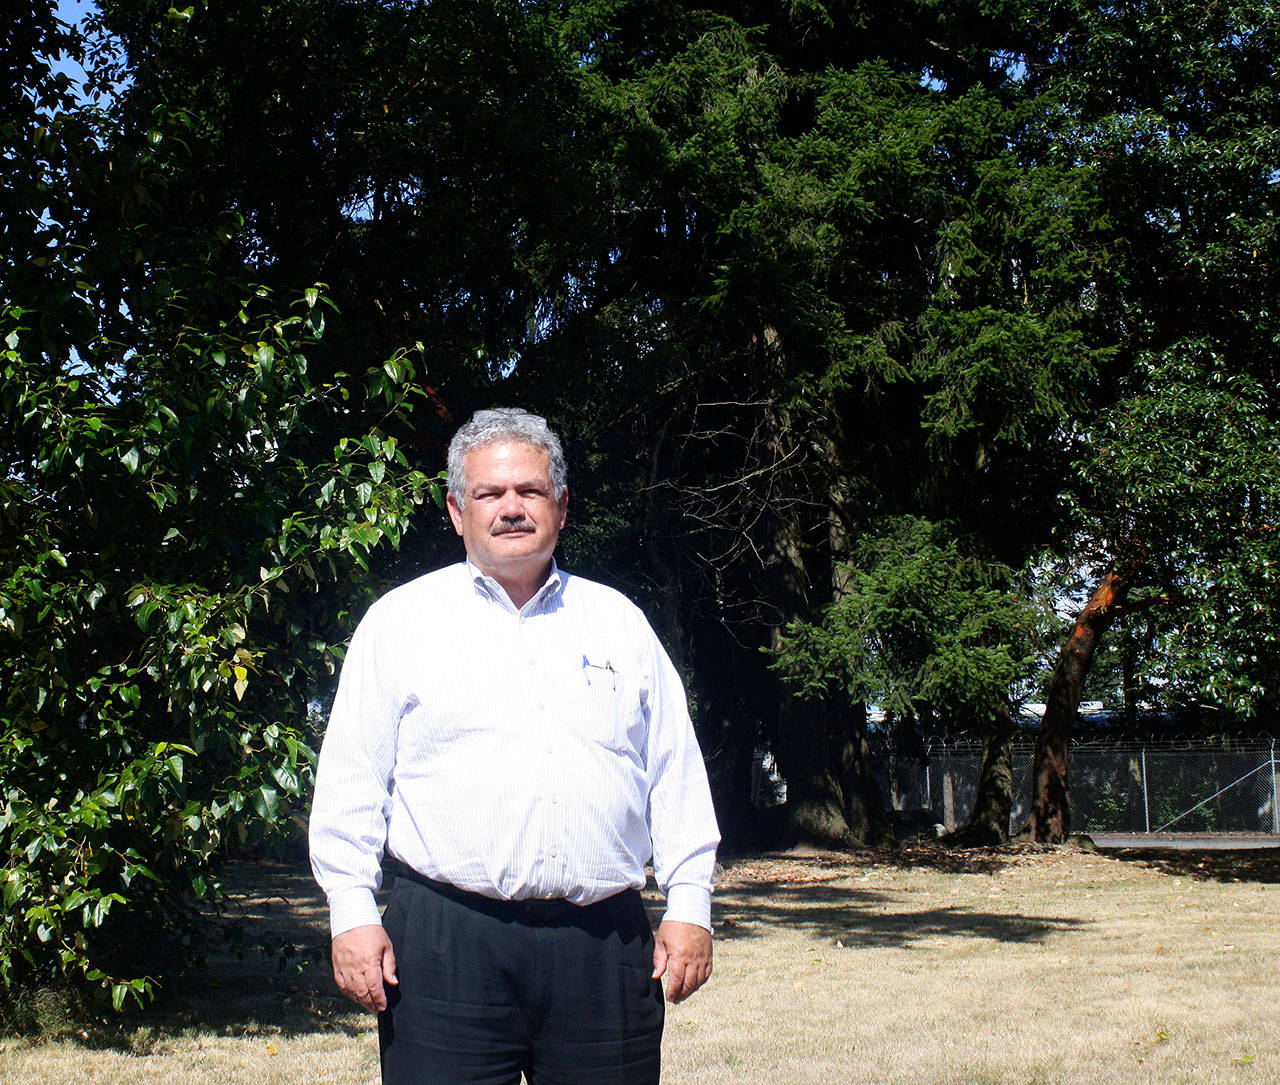 Glenn Carpenter stands at the city of Kent’s proposed site of a 165-foot-high water tower at Kronisch Park on the West Hill, just behind his law office at 24730 Military Road S. STEVE HUNTER, Kent Reporter